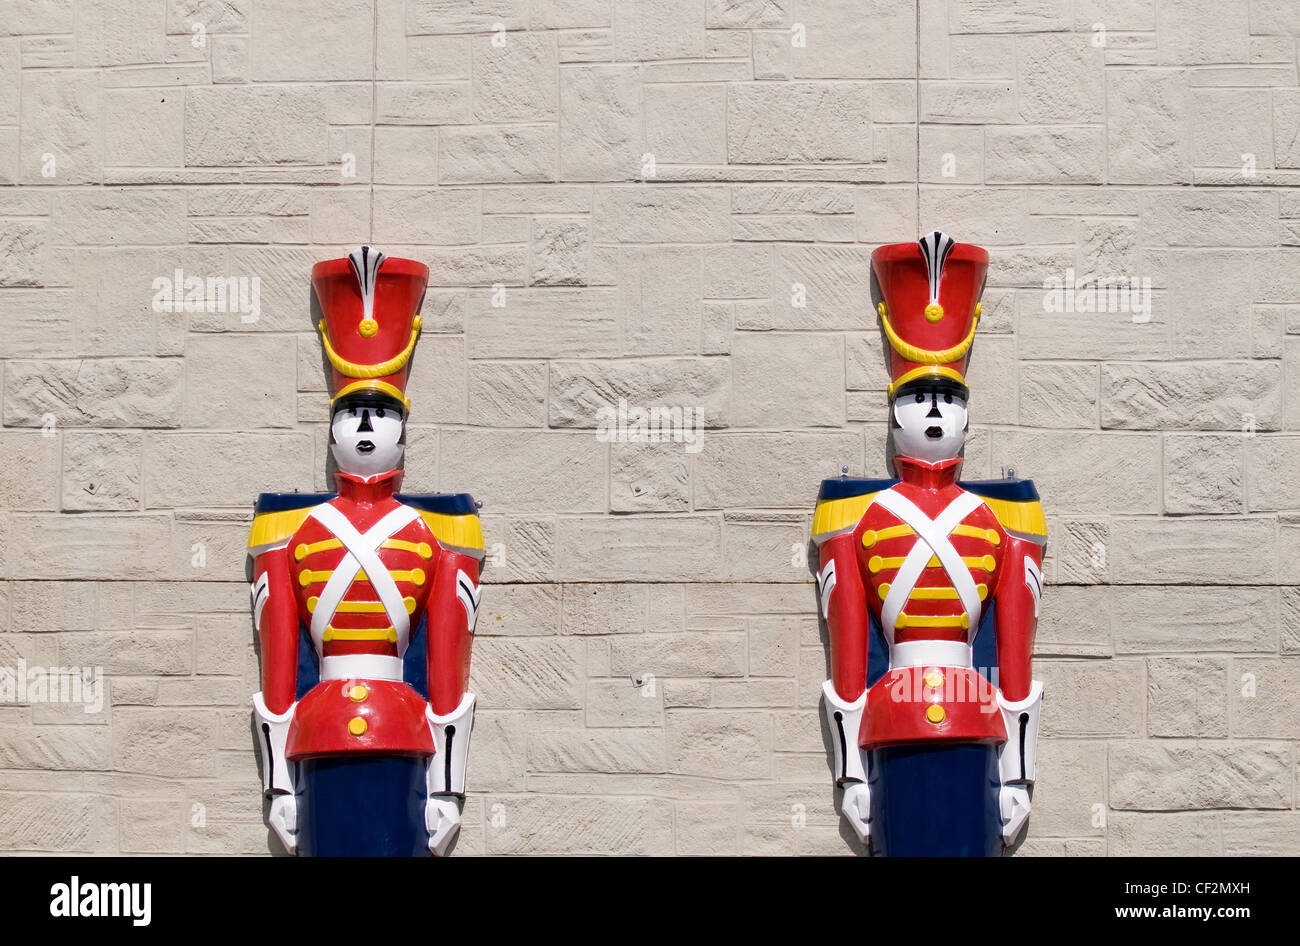 Models of two toy soldiers against a wall. Stock Photo